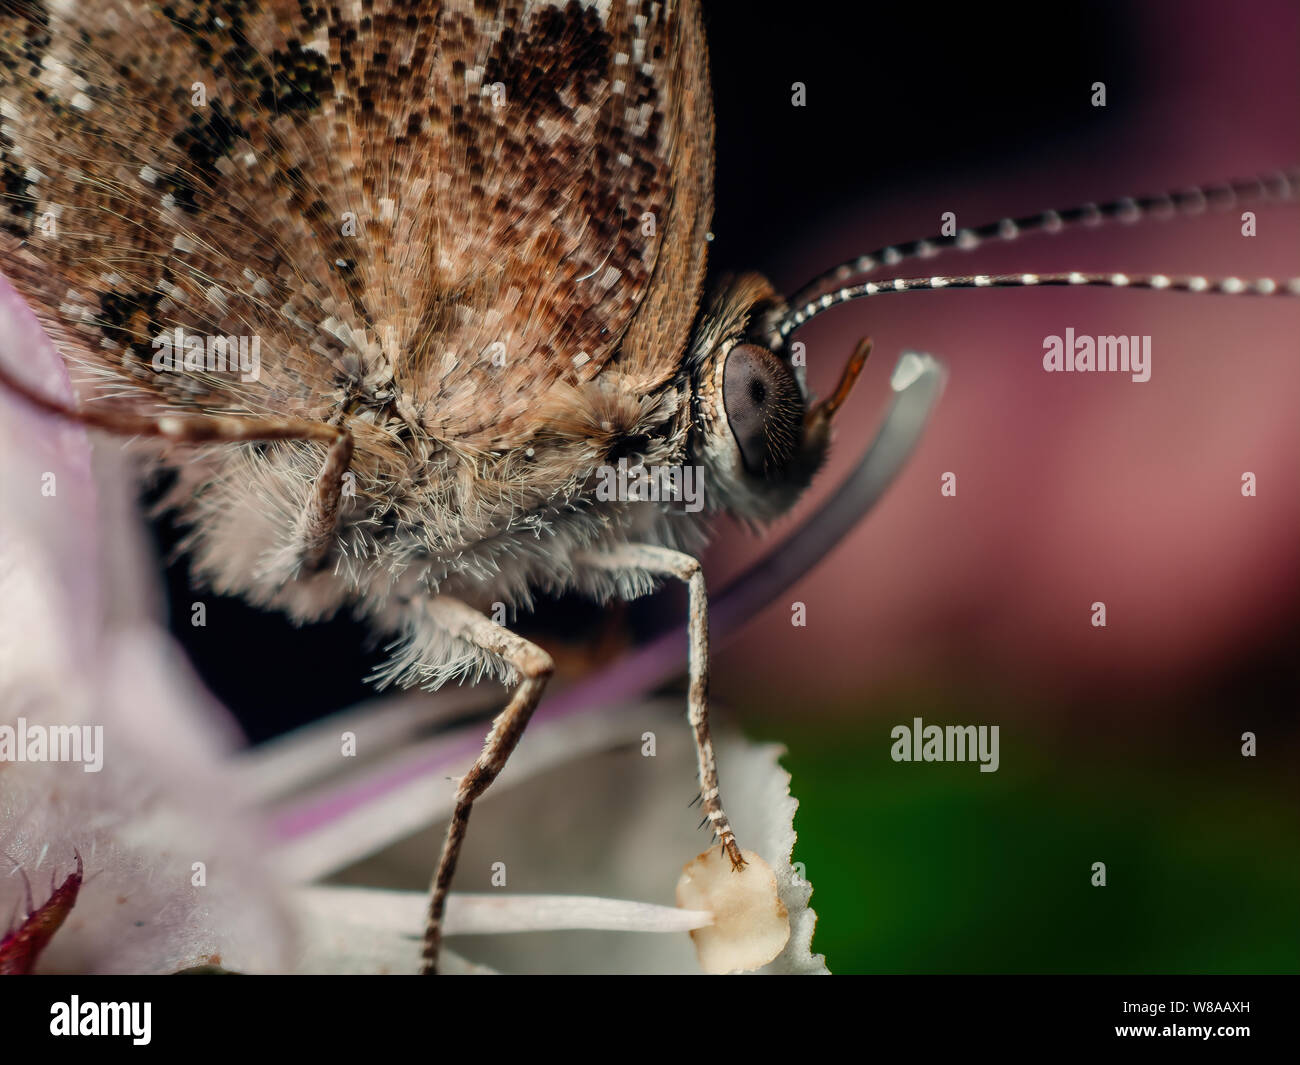 Extreme macro of a butterfly visiting a flower, scales and insect details visible Stock Photo